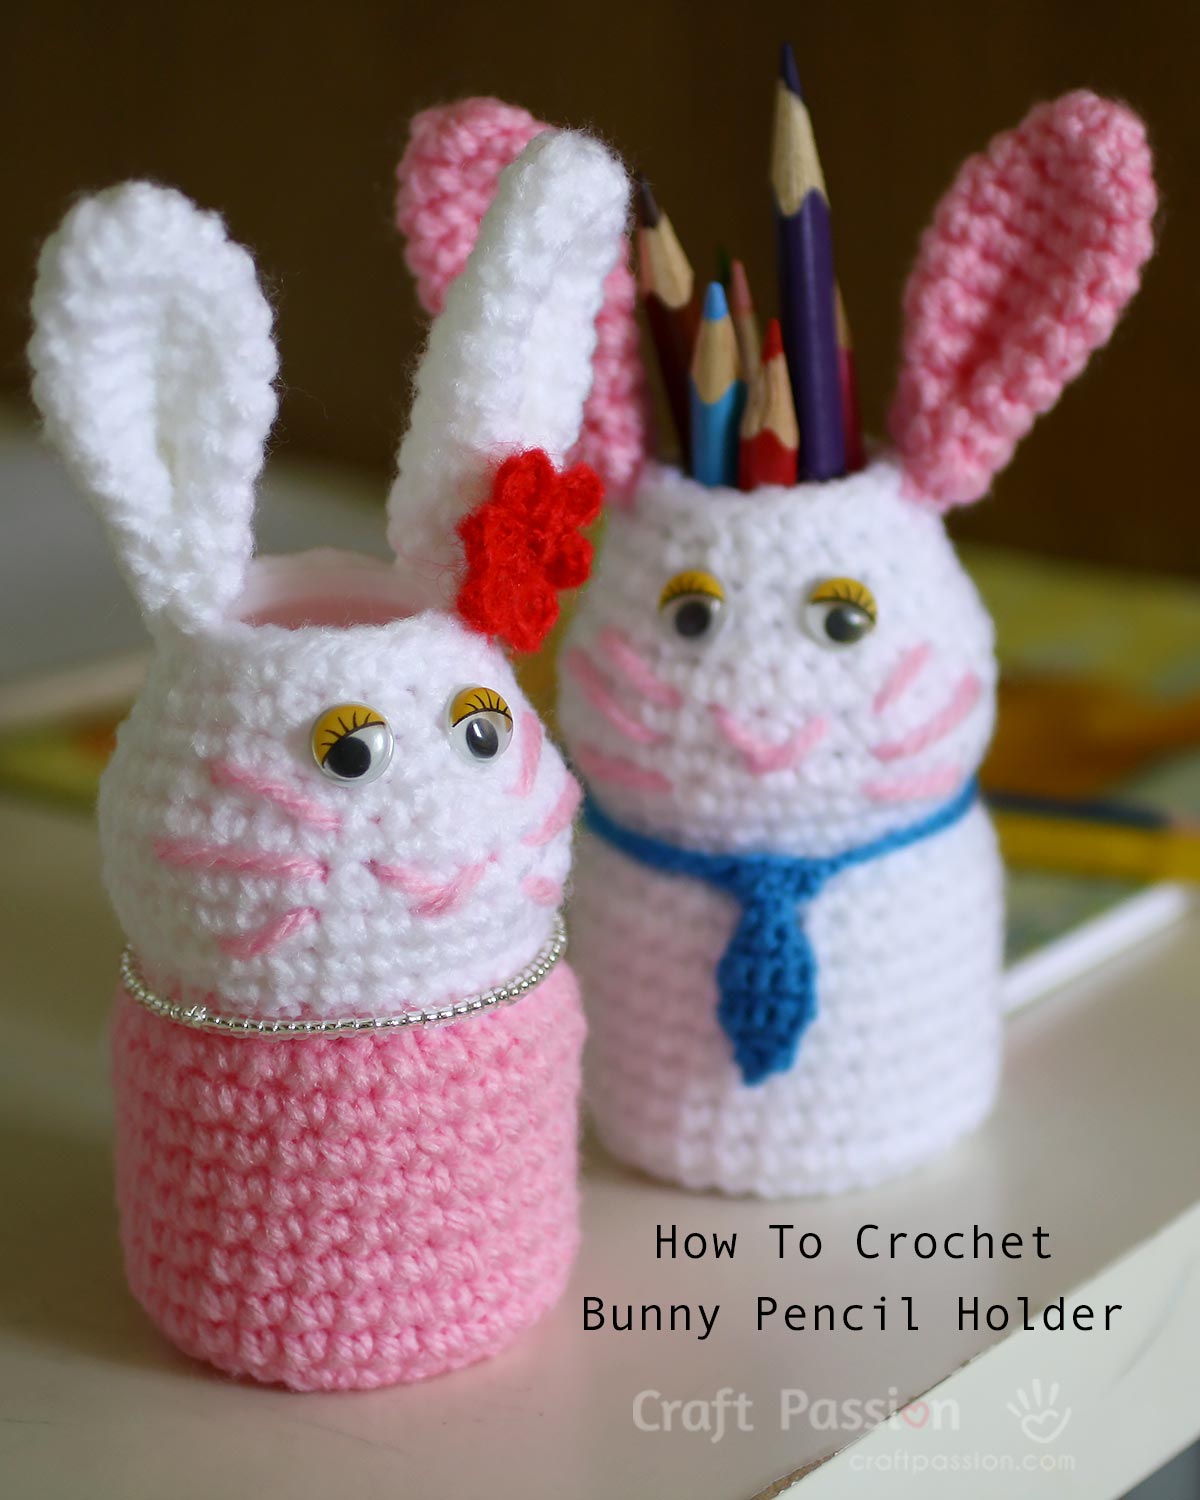 Learn how to crochet pencil holder in a cute bunny design with stashed yarns. You neeed  a drink bottle (I used Vitagen bottle) and google eyes.